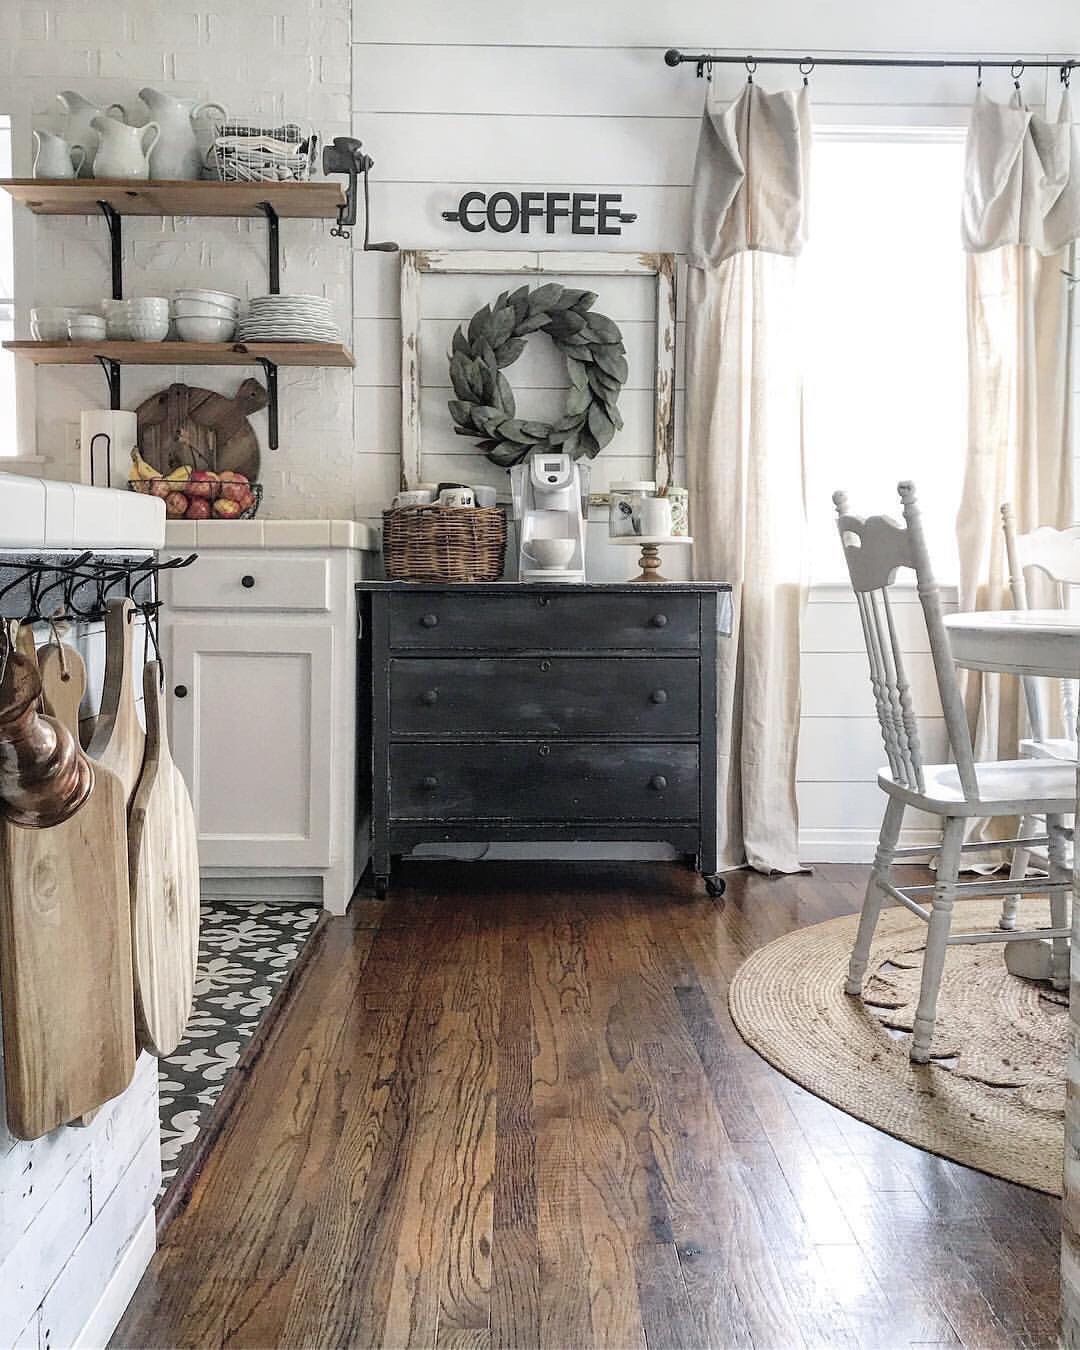 Well I’m not in to coffee stations, but I like where this is going -   23 cute dresser decor
 ideas